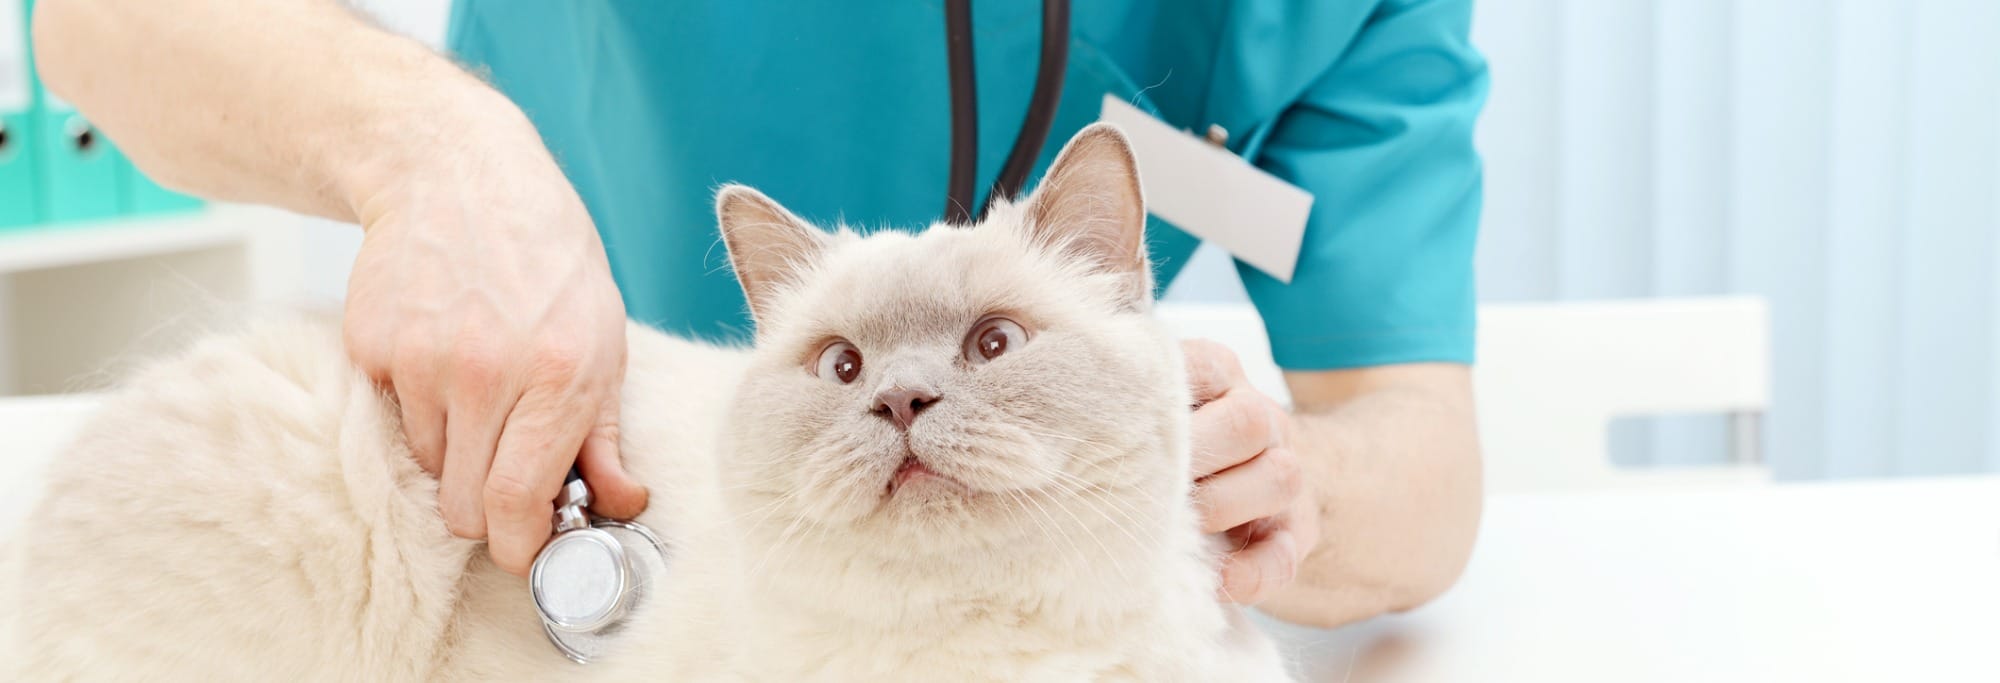 white cat being examined by vet with stethoscope